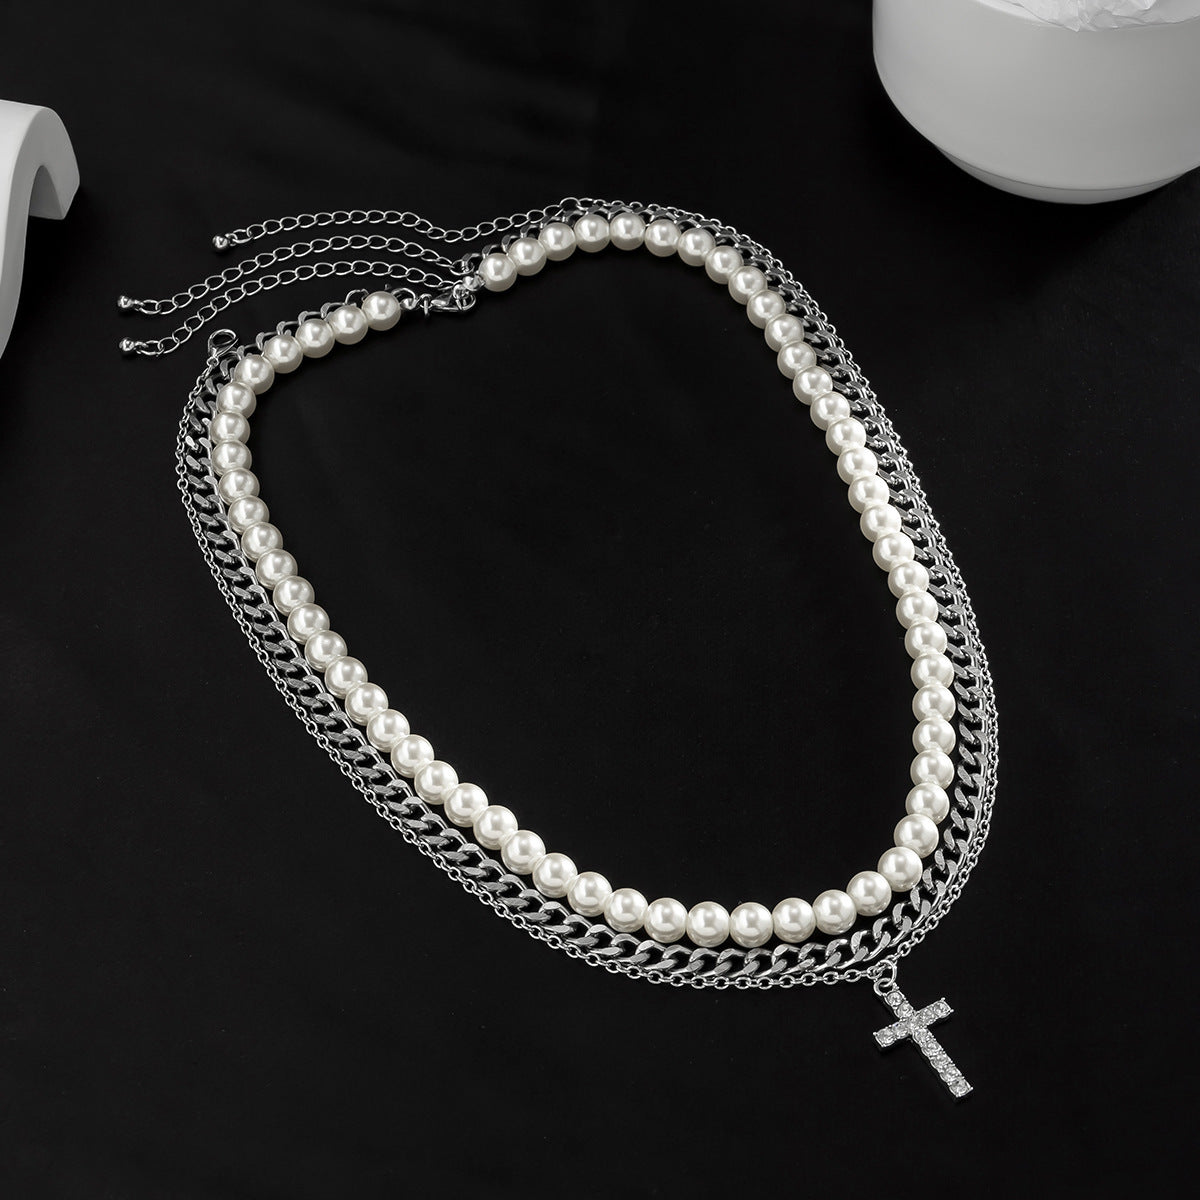 Fashionable Three-Layer Diamond Cross with Pearl Pendant Necklace